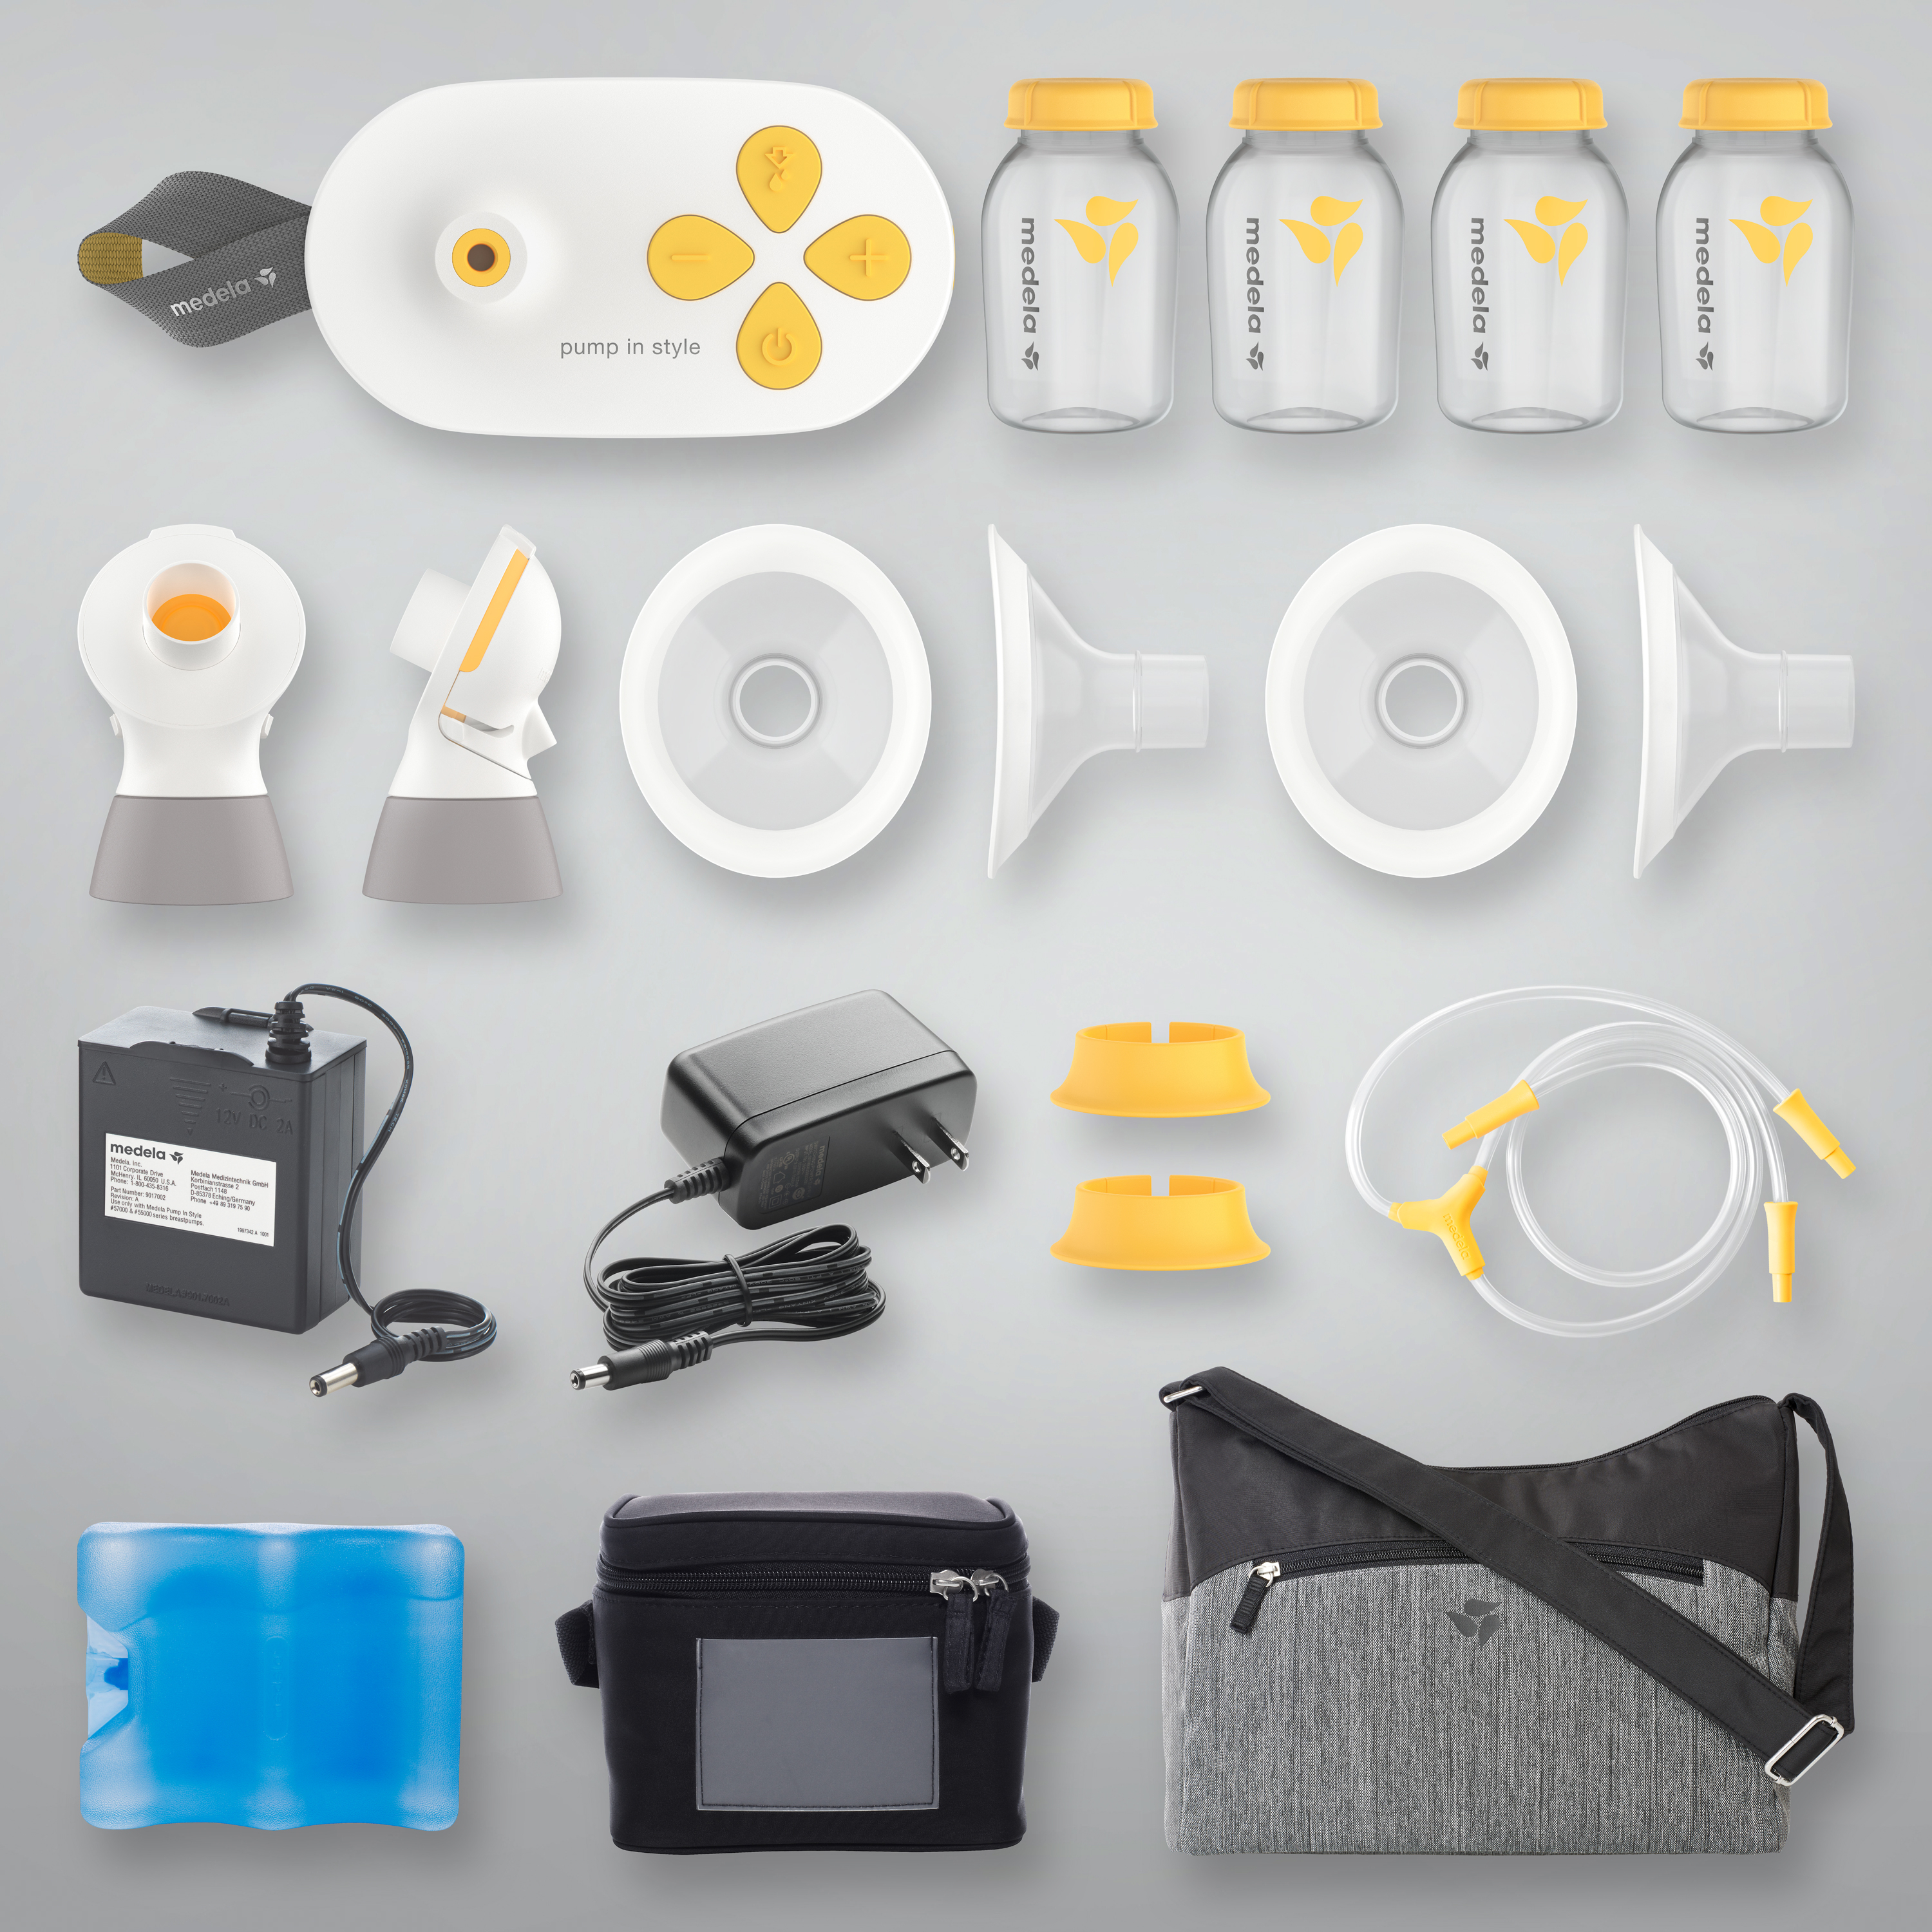 Medela Pump in Style with MaxFlow Double Electric Breast Pump Set, 22 Piece Kit - image 3 of 11